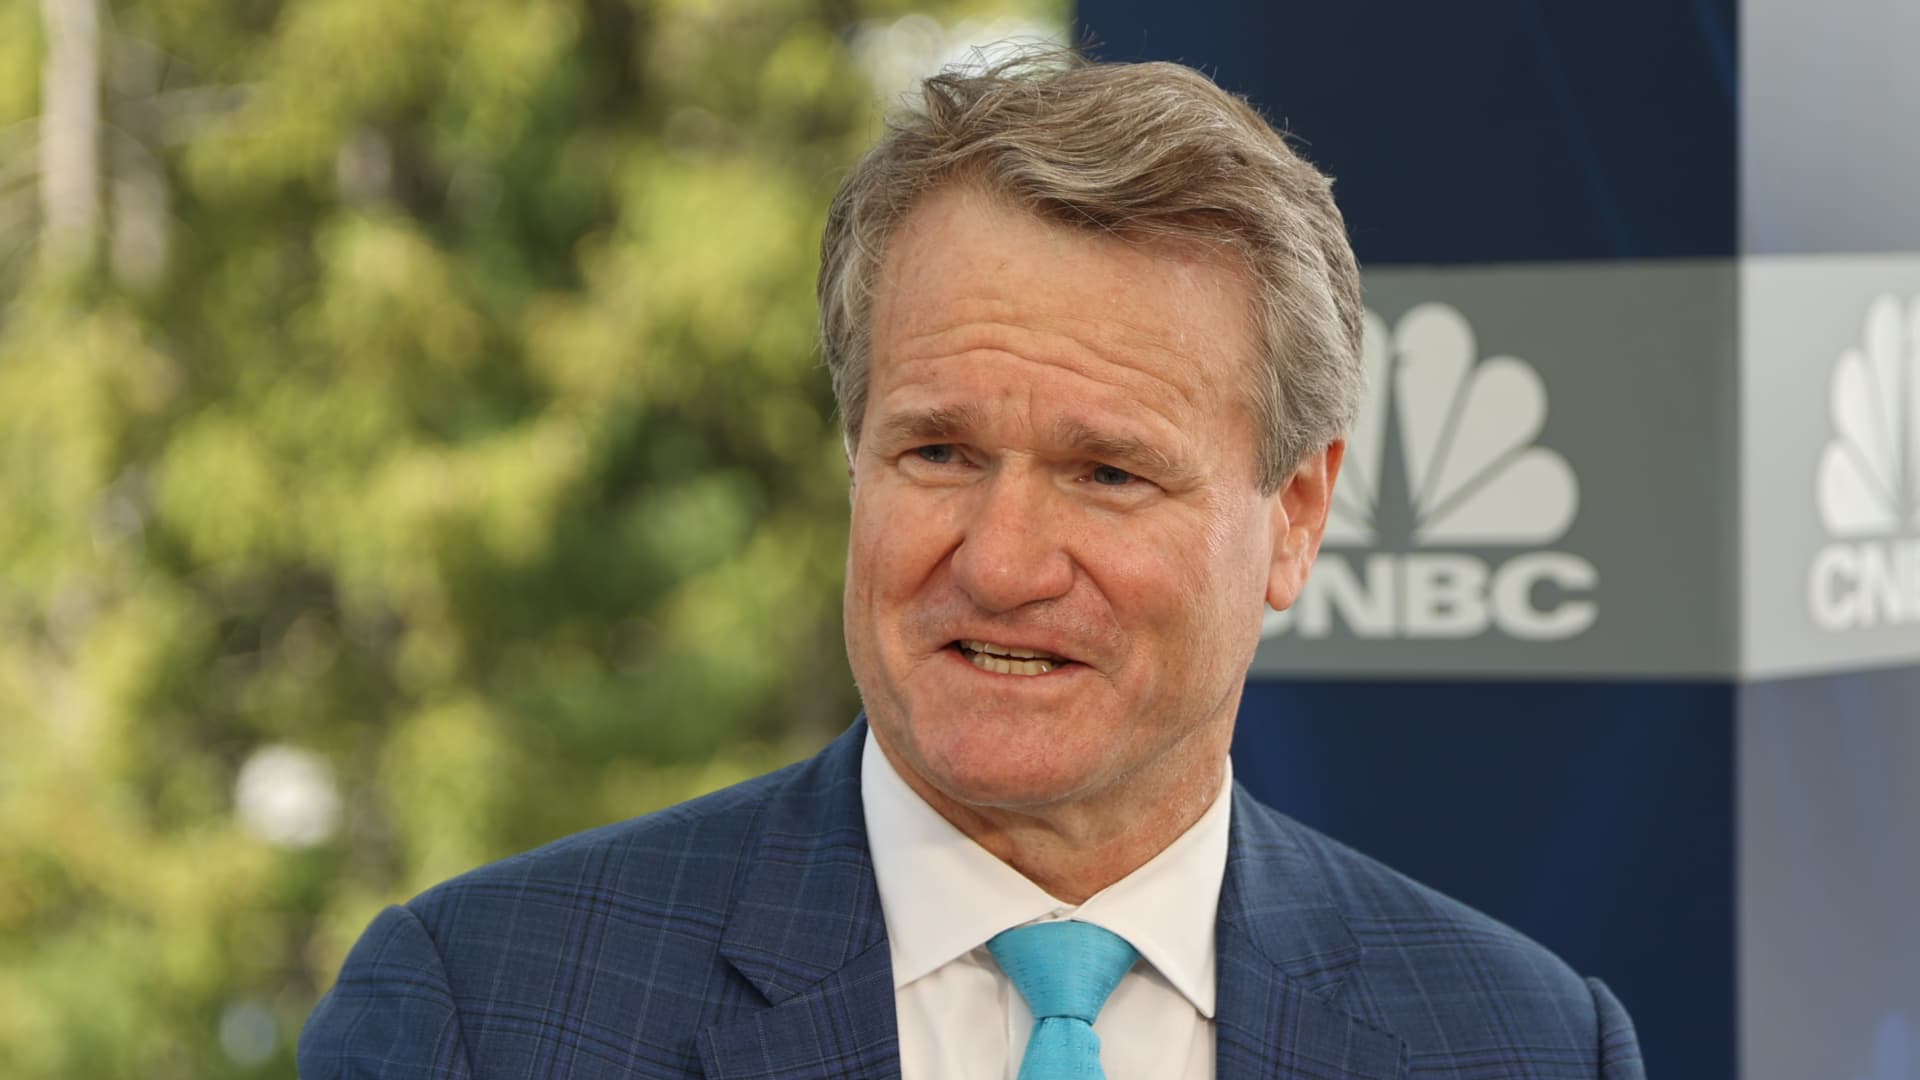 Bank of America CEO isn't worried about debt funding